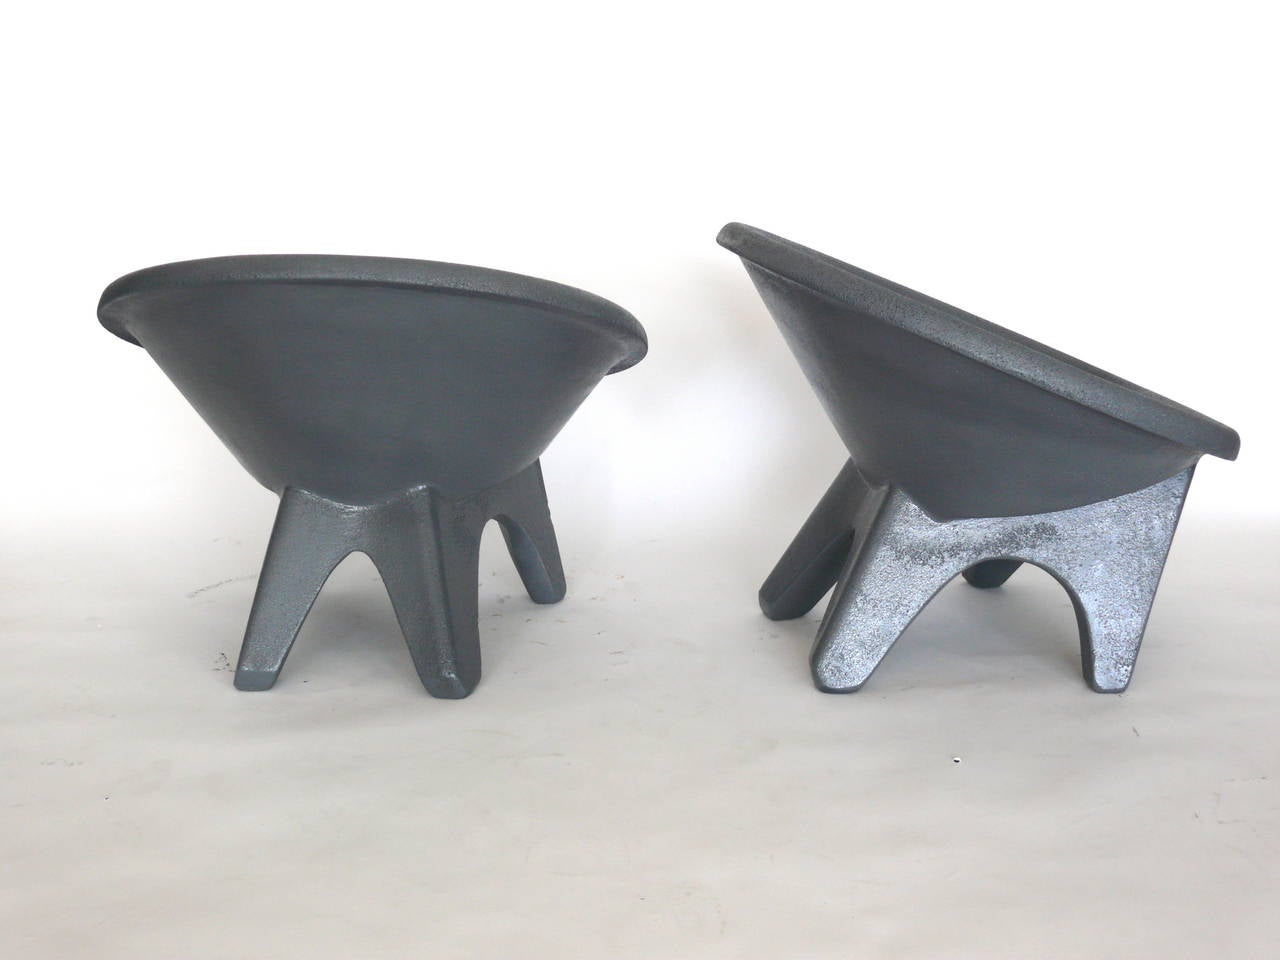 French Sculptural Concrete Chairs 1